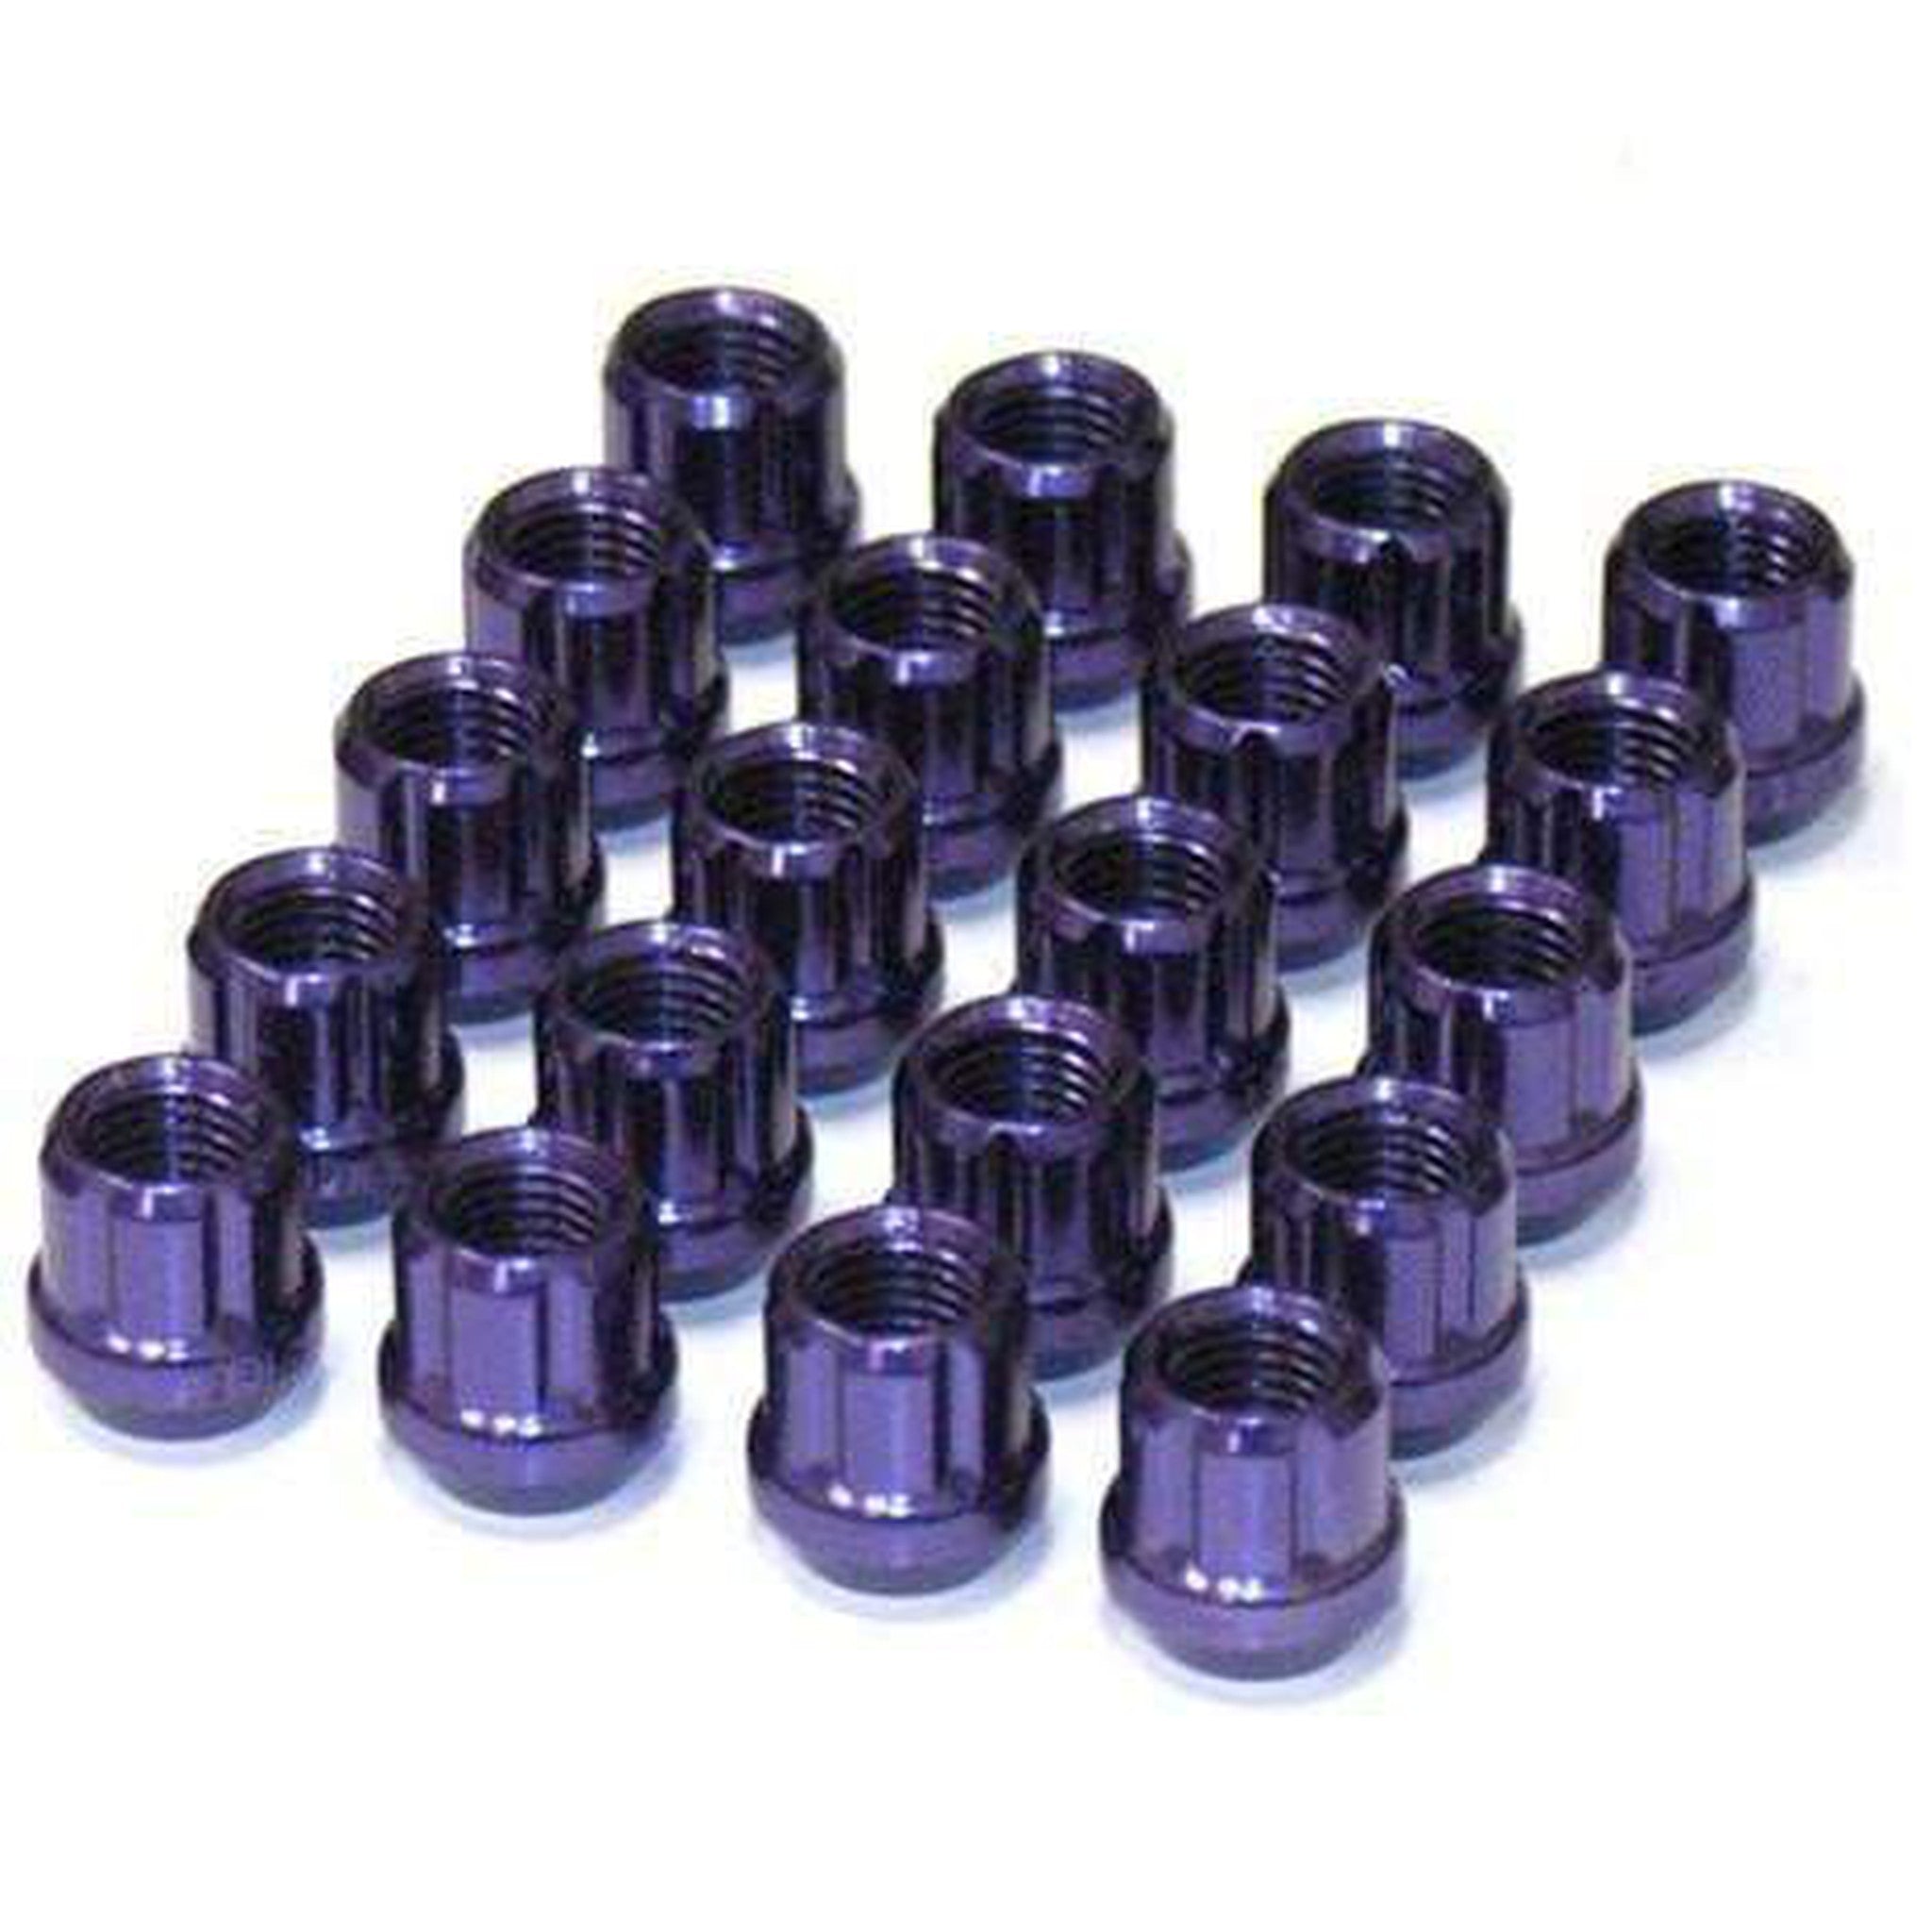 Muteki Super Tuner Open-Ended Lug Nuts 12x1.25mm – Import Image Racing